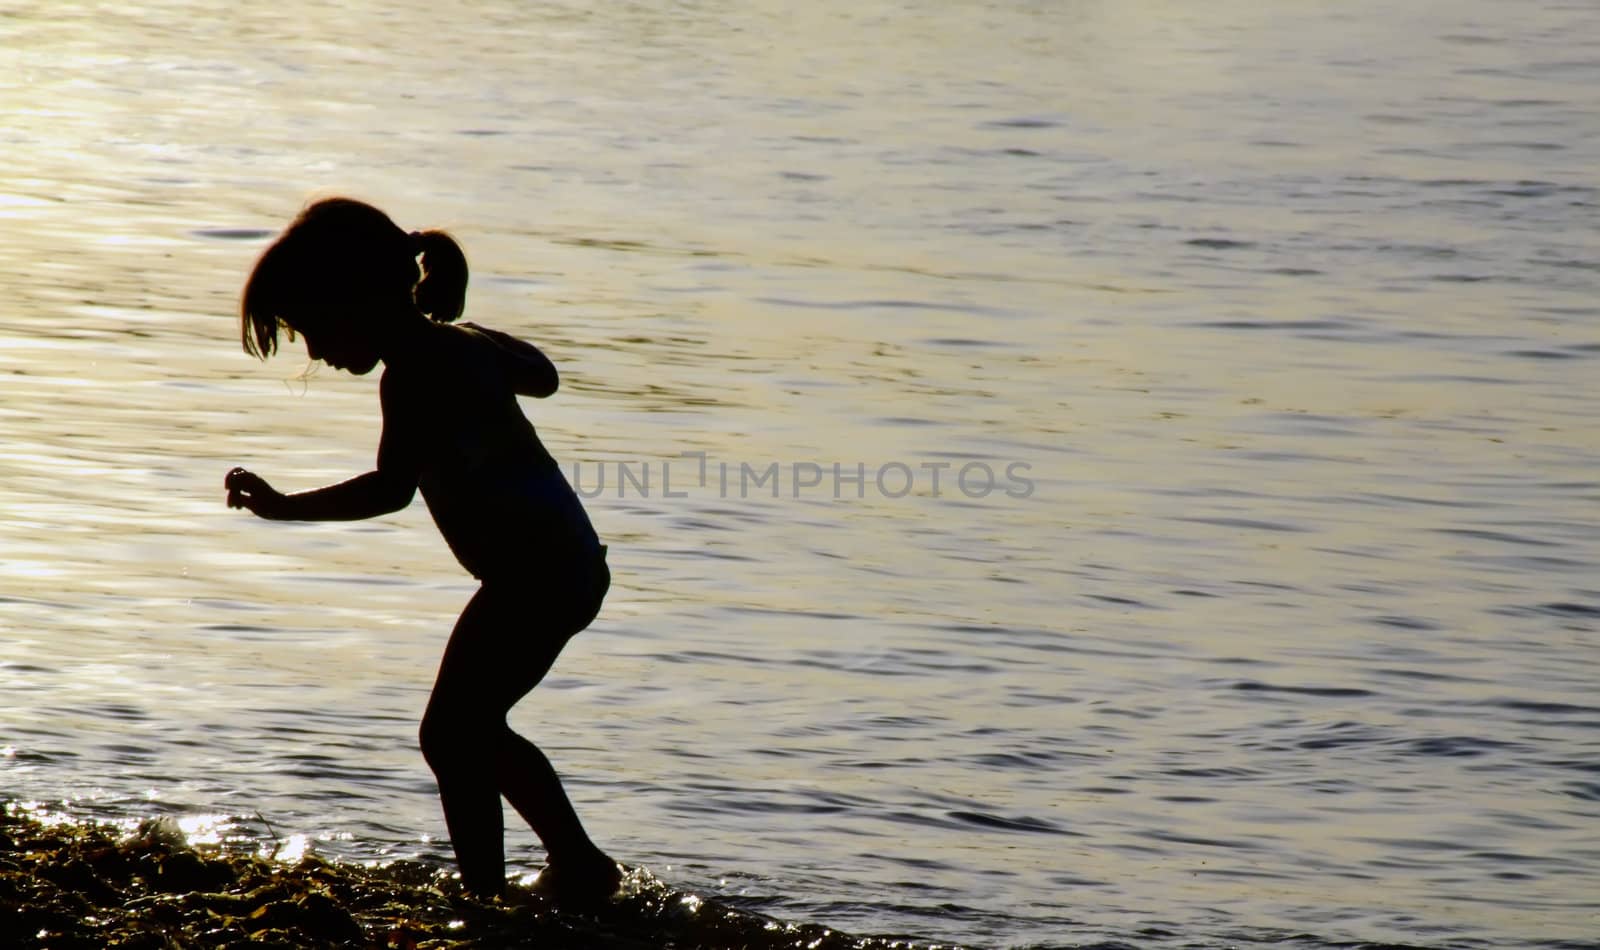 Beach Series - images depicting the general feeling and mood at the beach in the Mediterranean